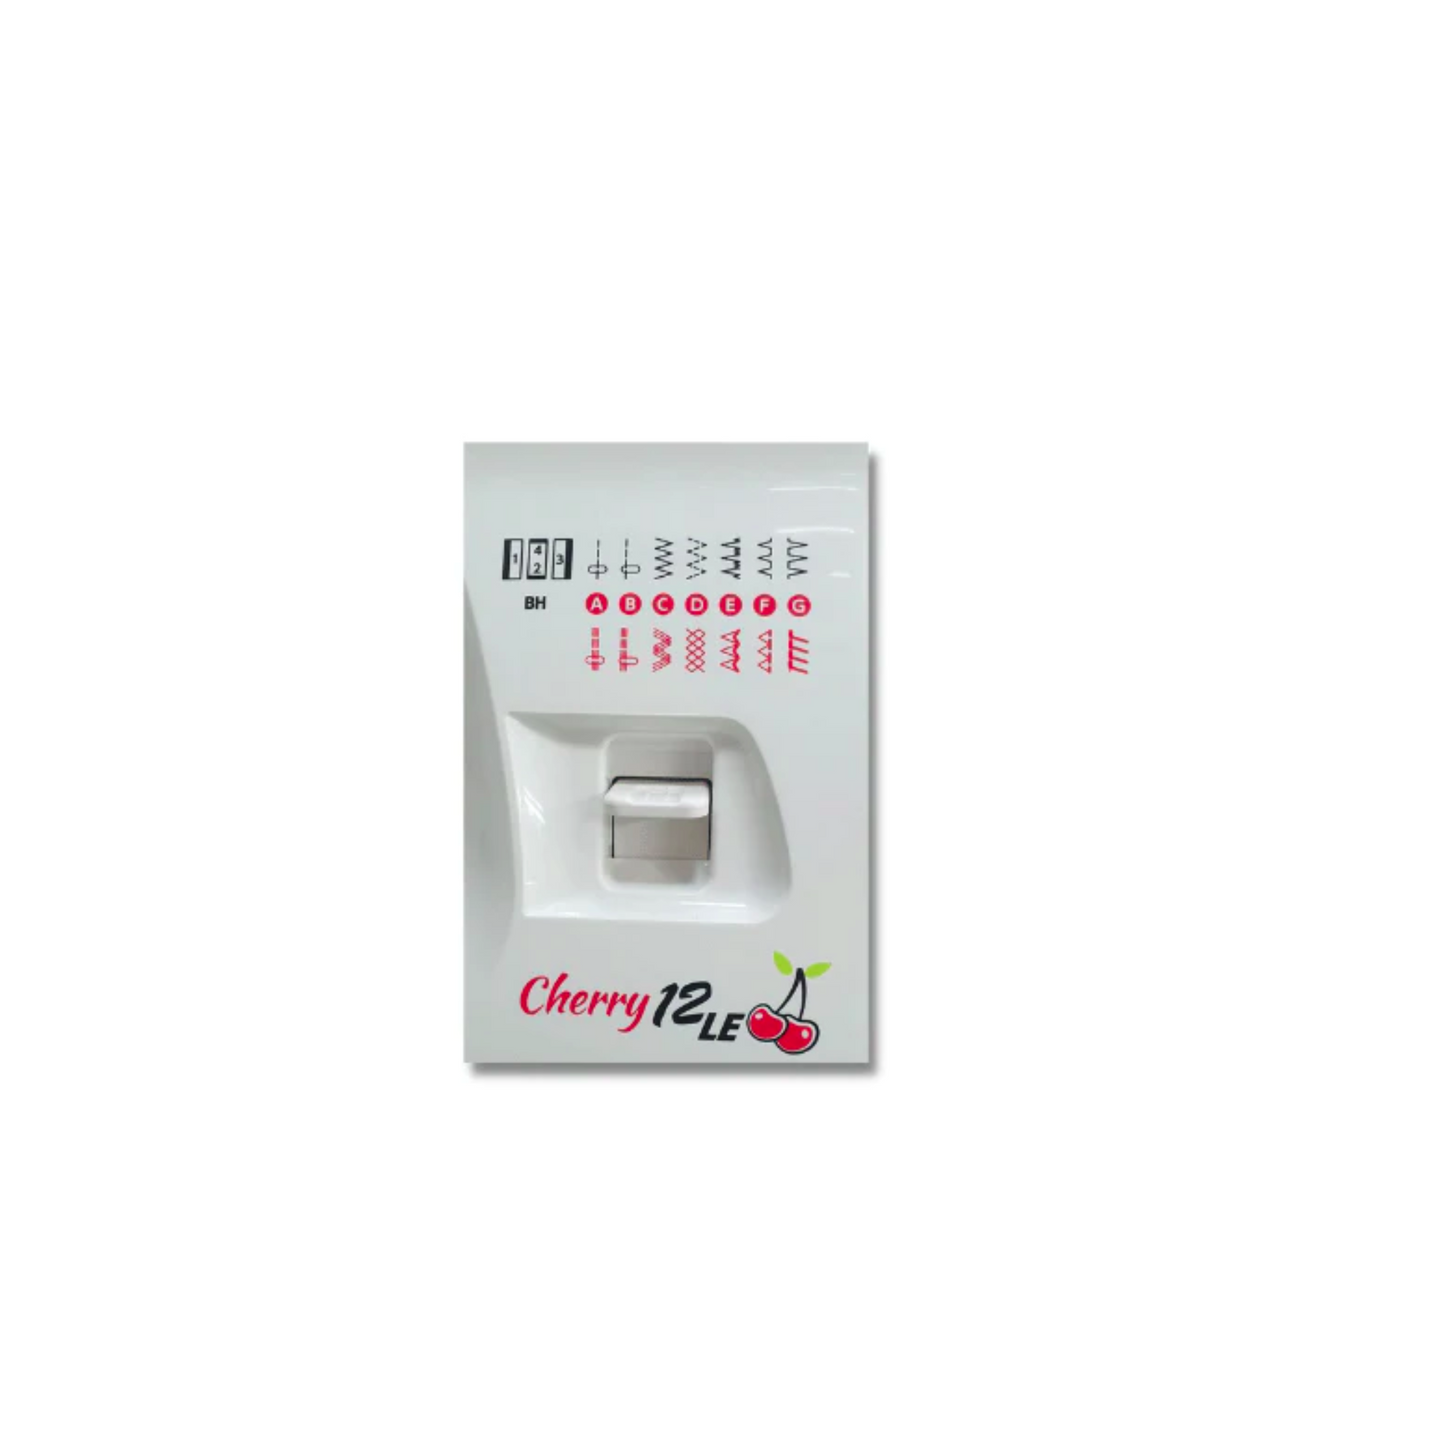 Janome cherry 12LE - Sewing machine - Cherry - Close view